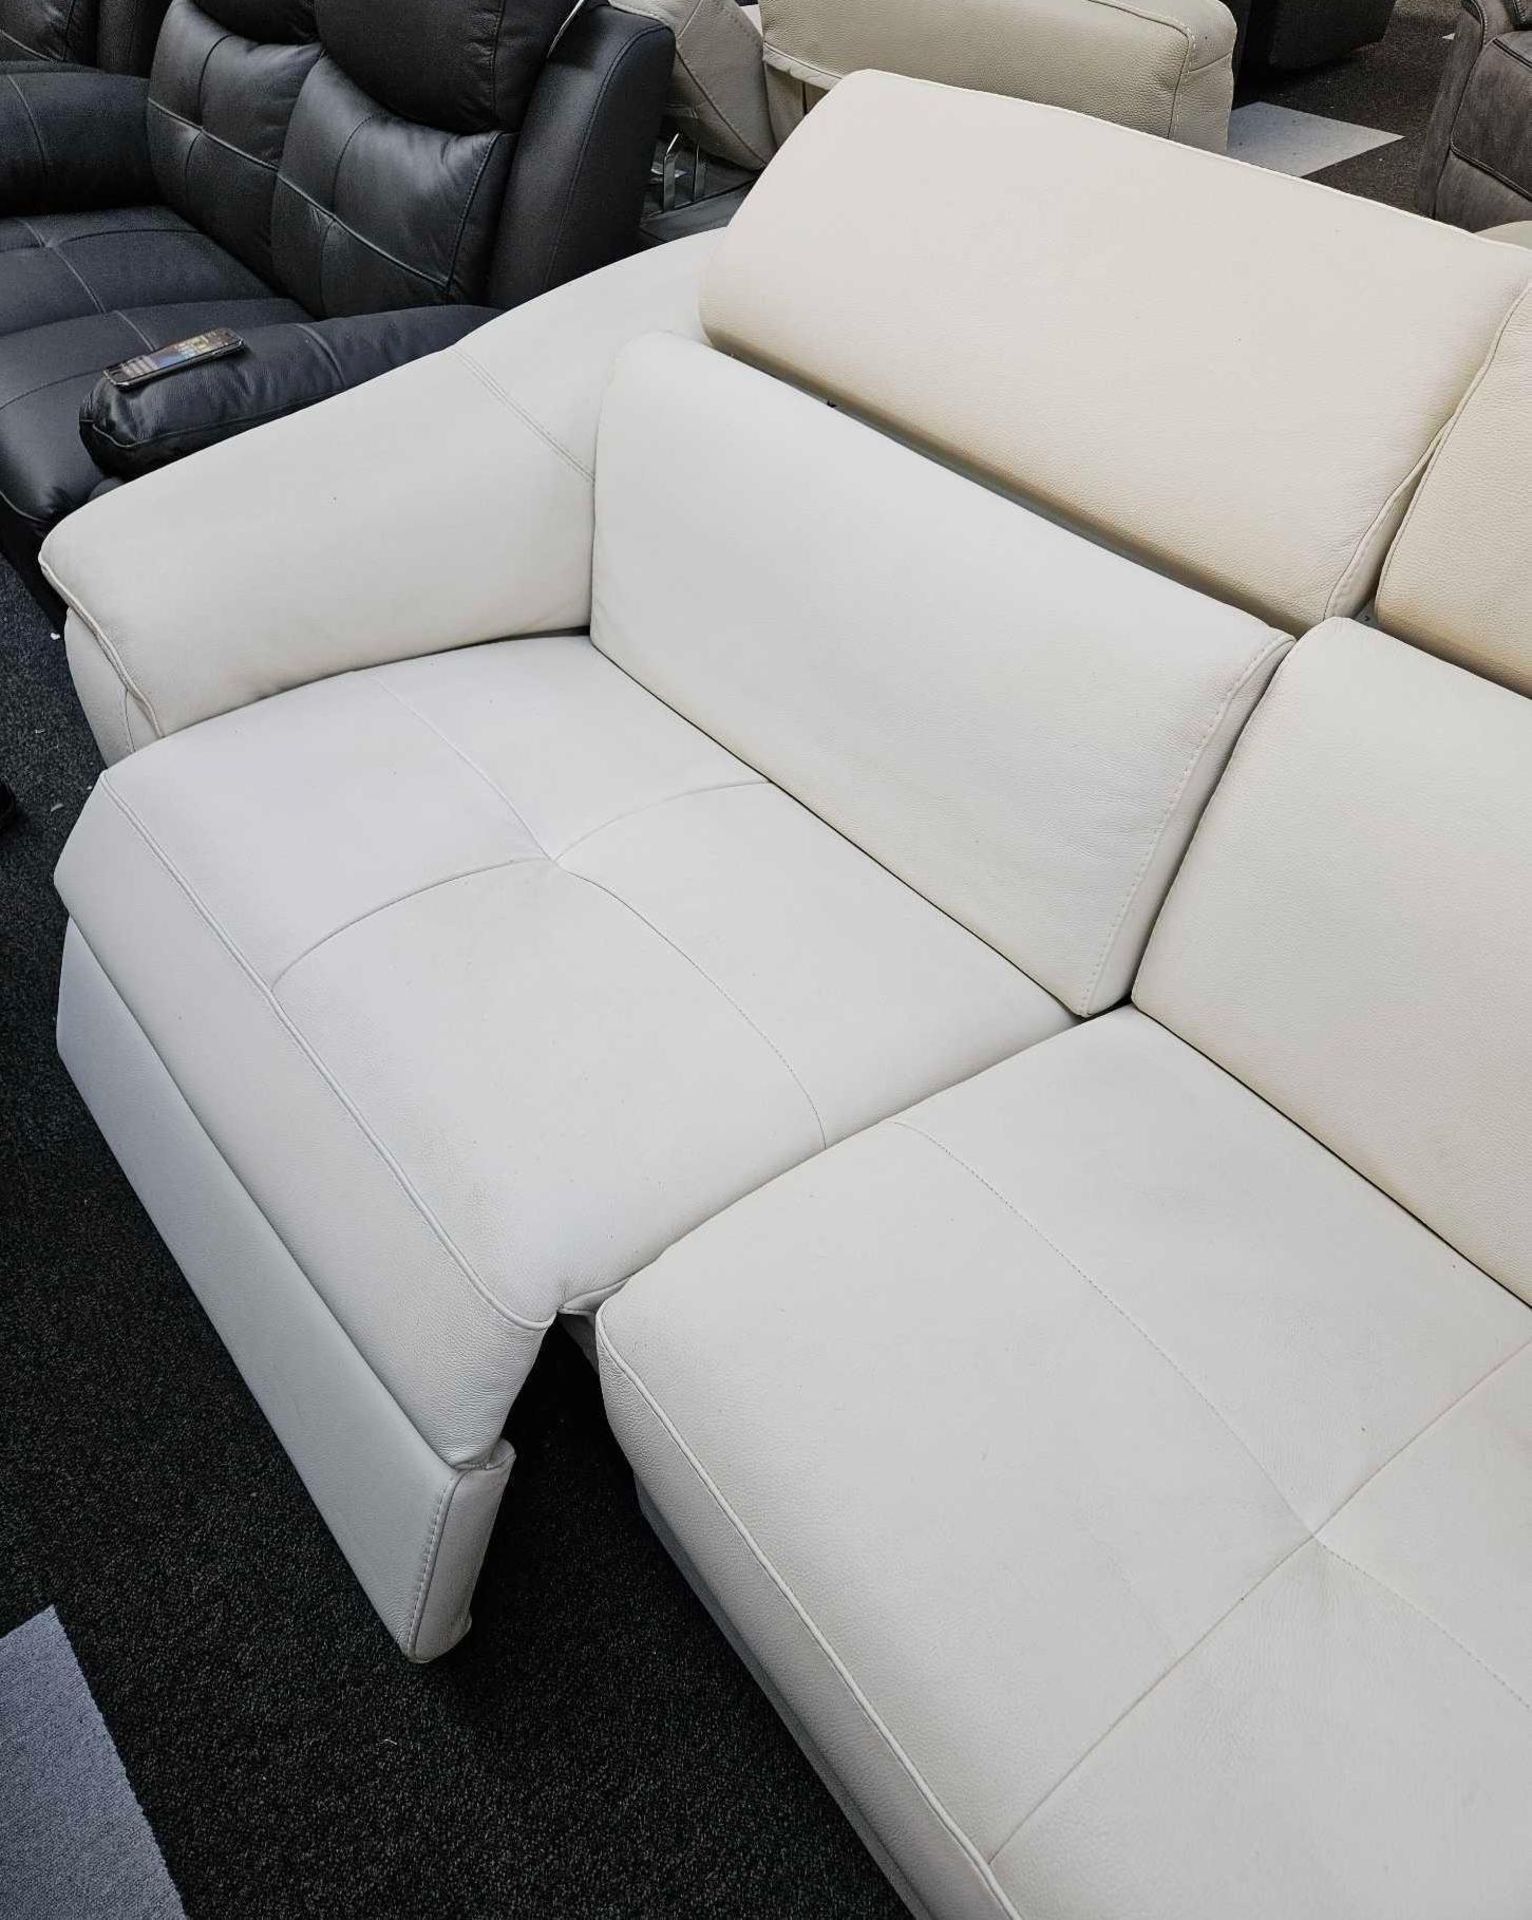 *EX DISPLAY* Nicolette 3 + 1 + 1 sofa with power reclining headrest and 2 power chairs in cream. - Image 2 of 4